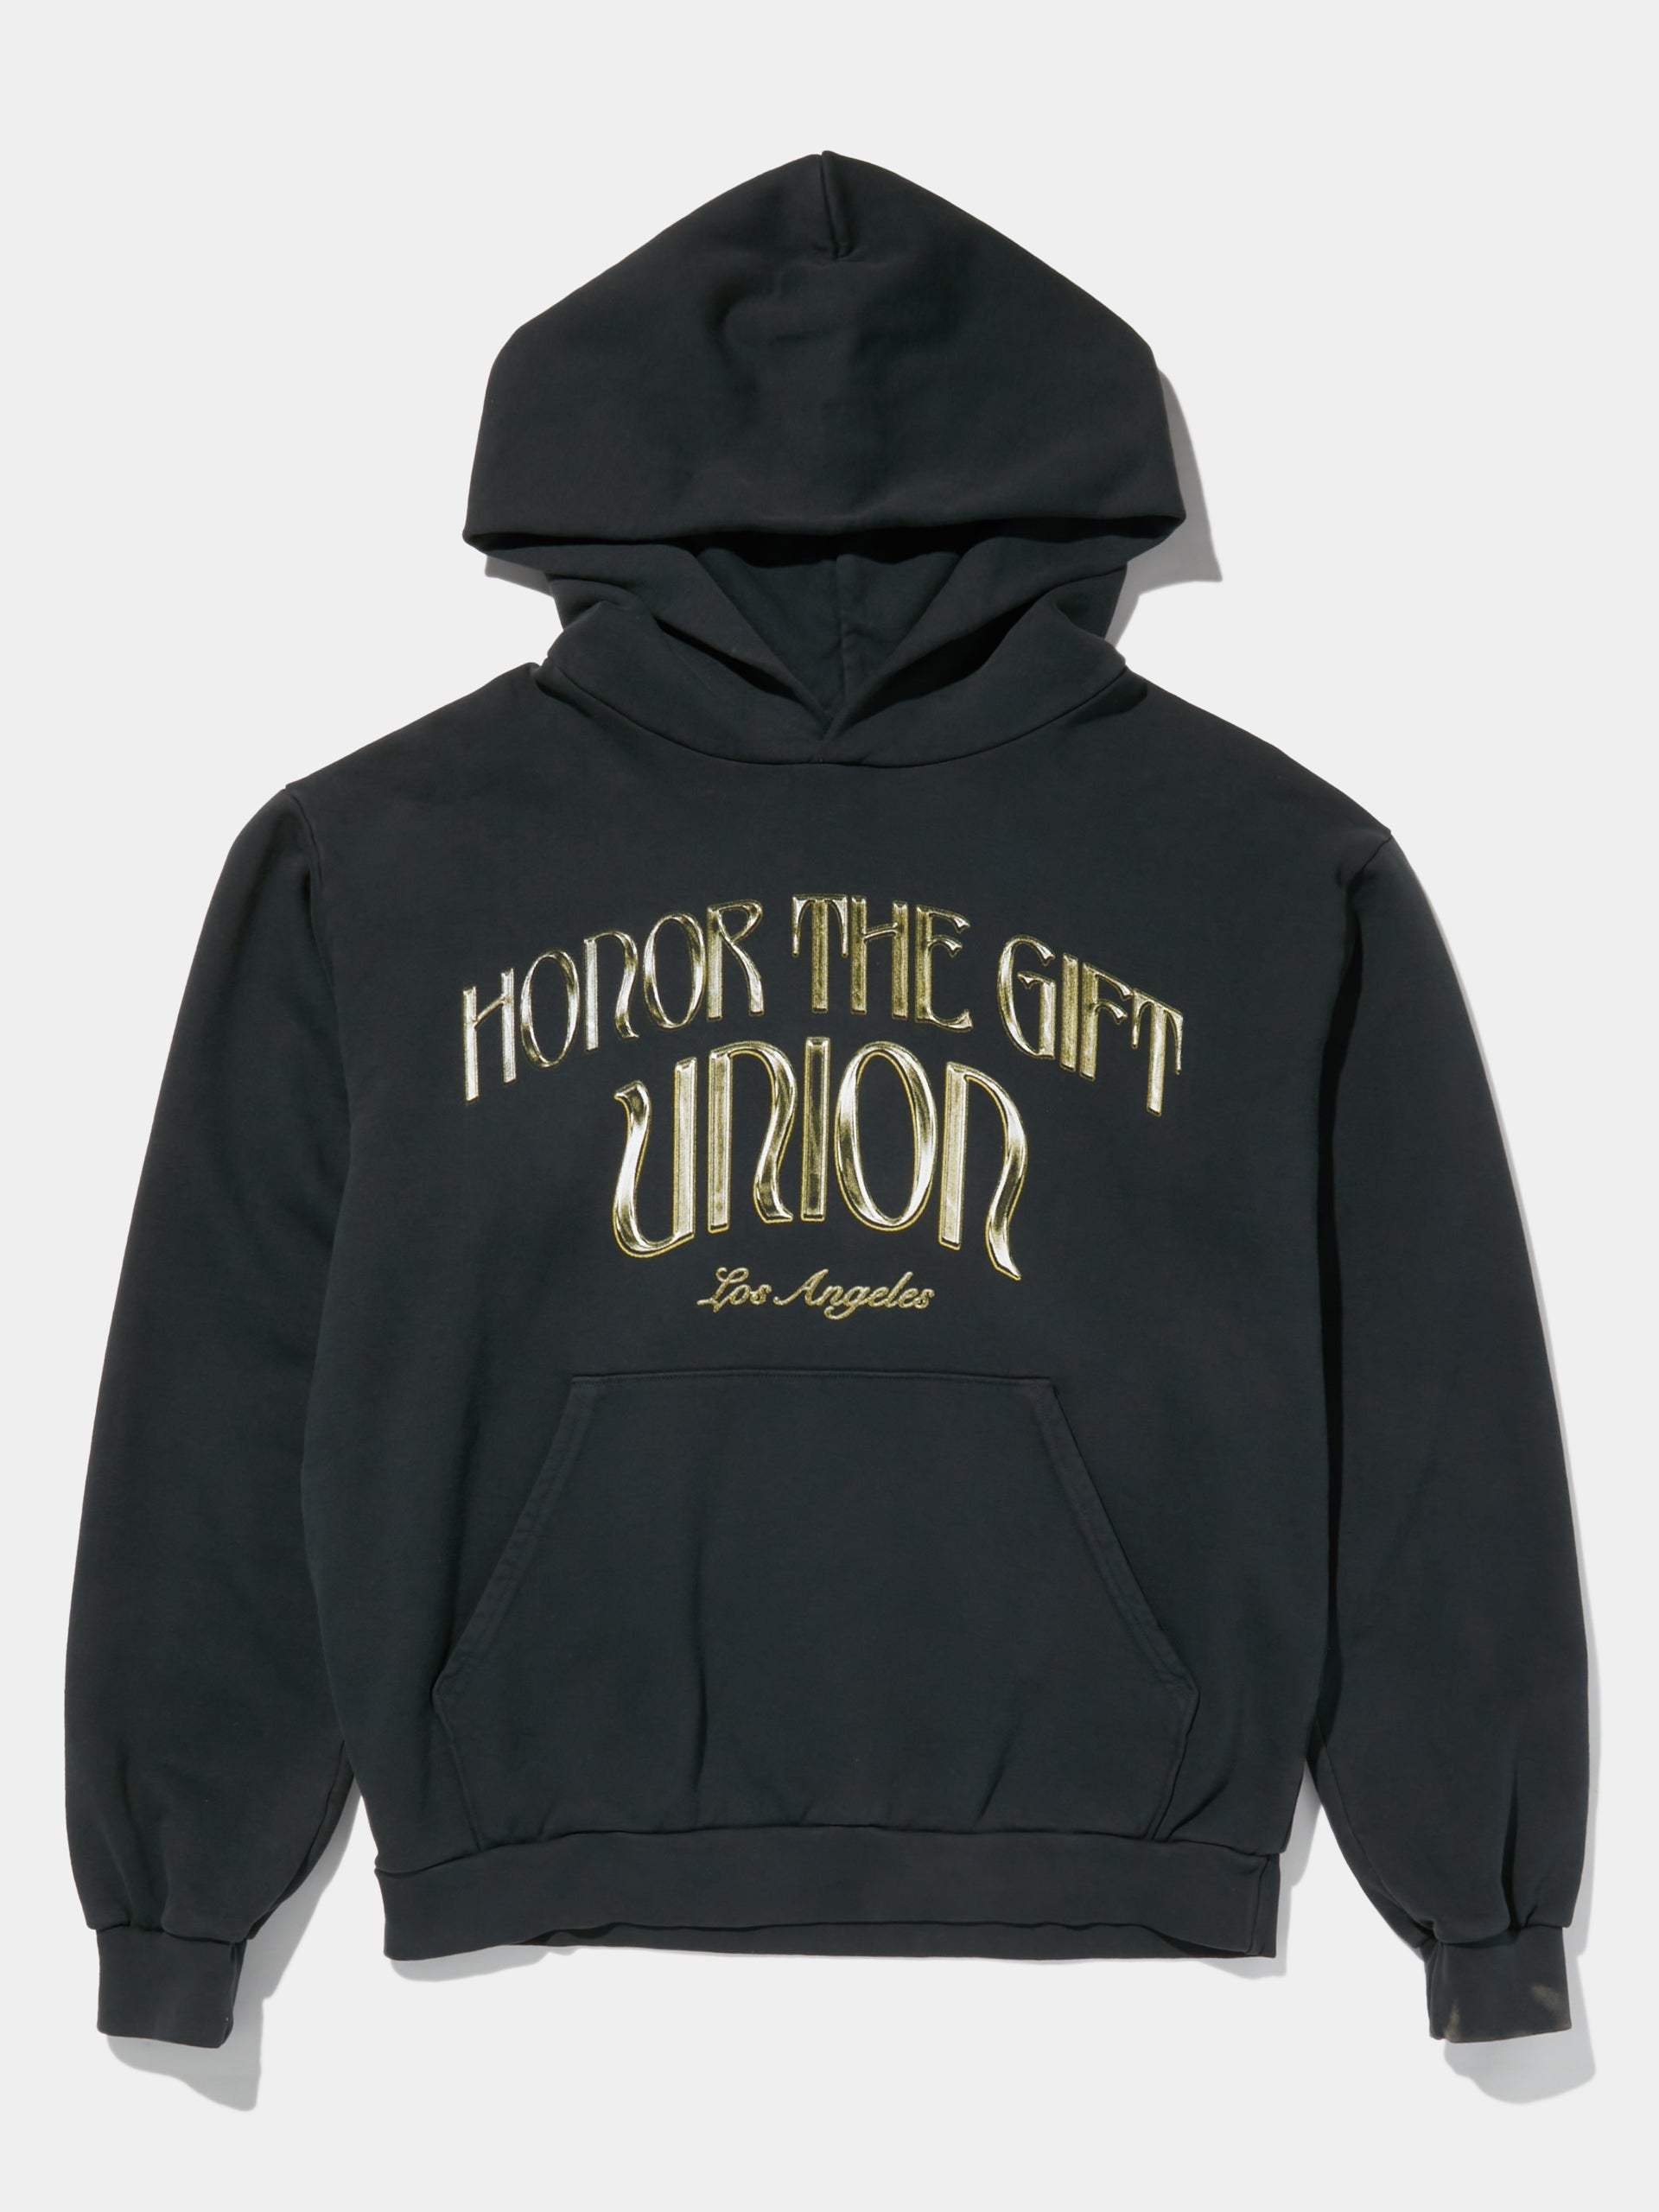 Buy Honor The Gift HTG x UNION HOODIE (Black) Online at UNION LOS